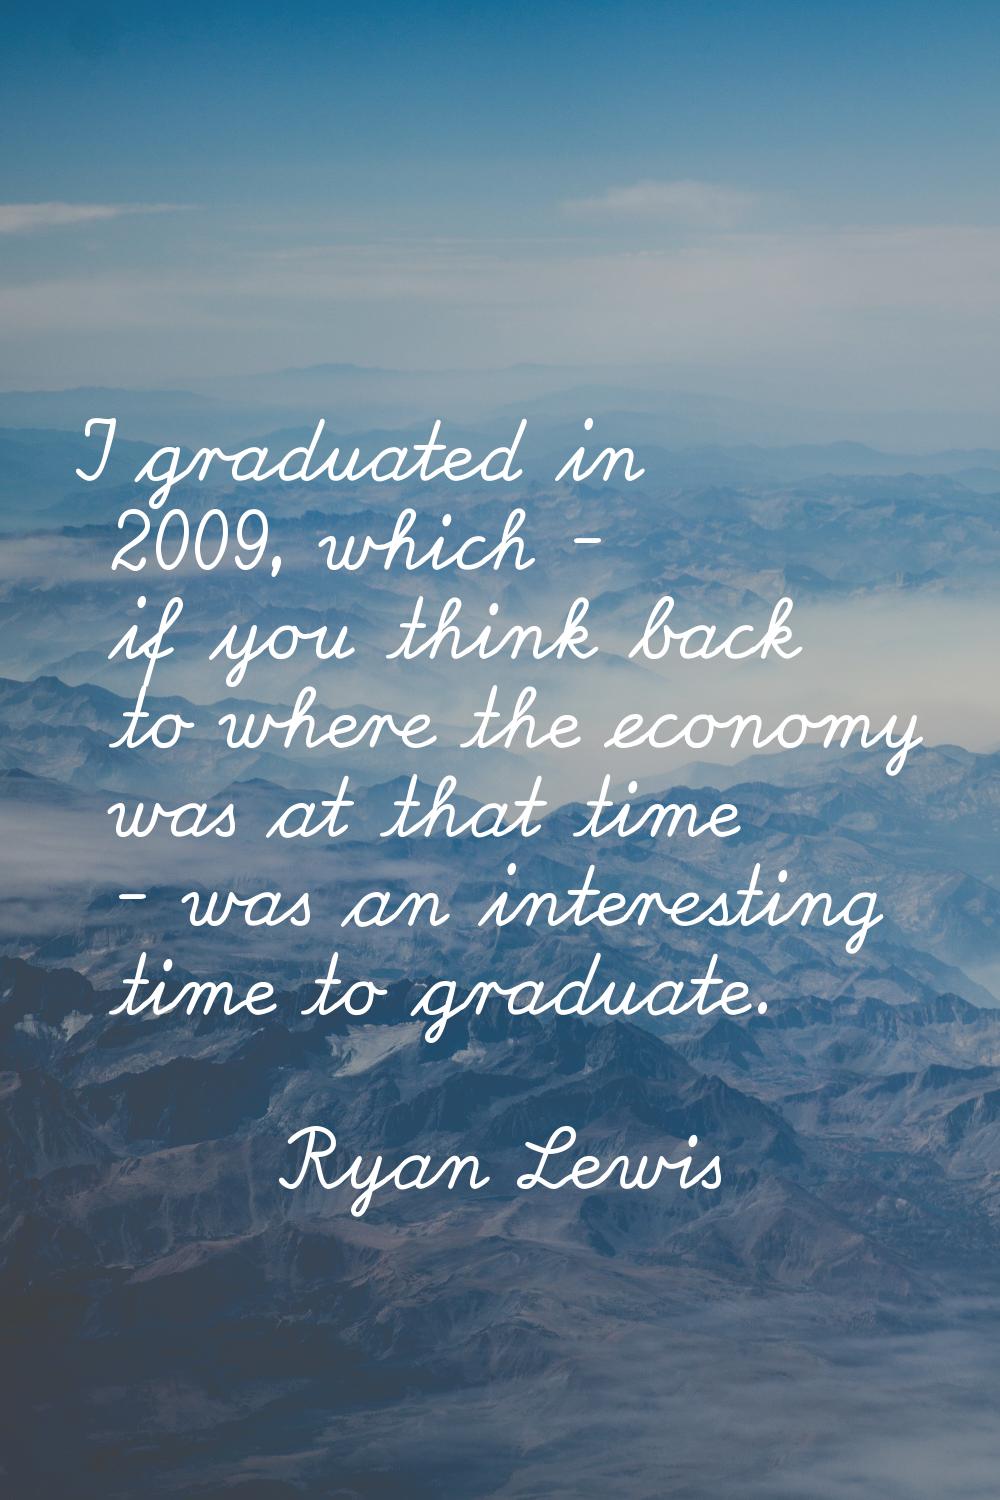 I graduated in 2009, which - if you think back to where the economy was at that time - was an inter